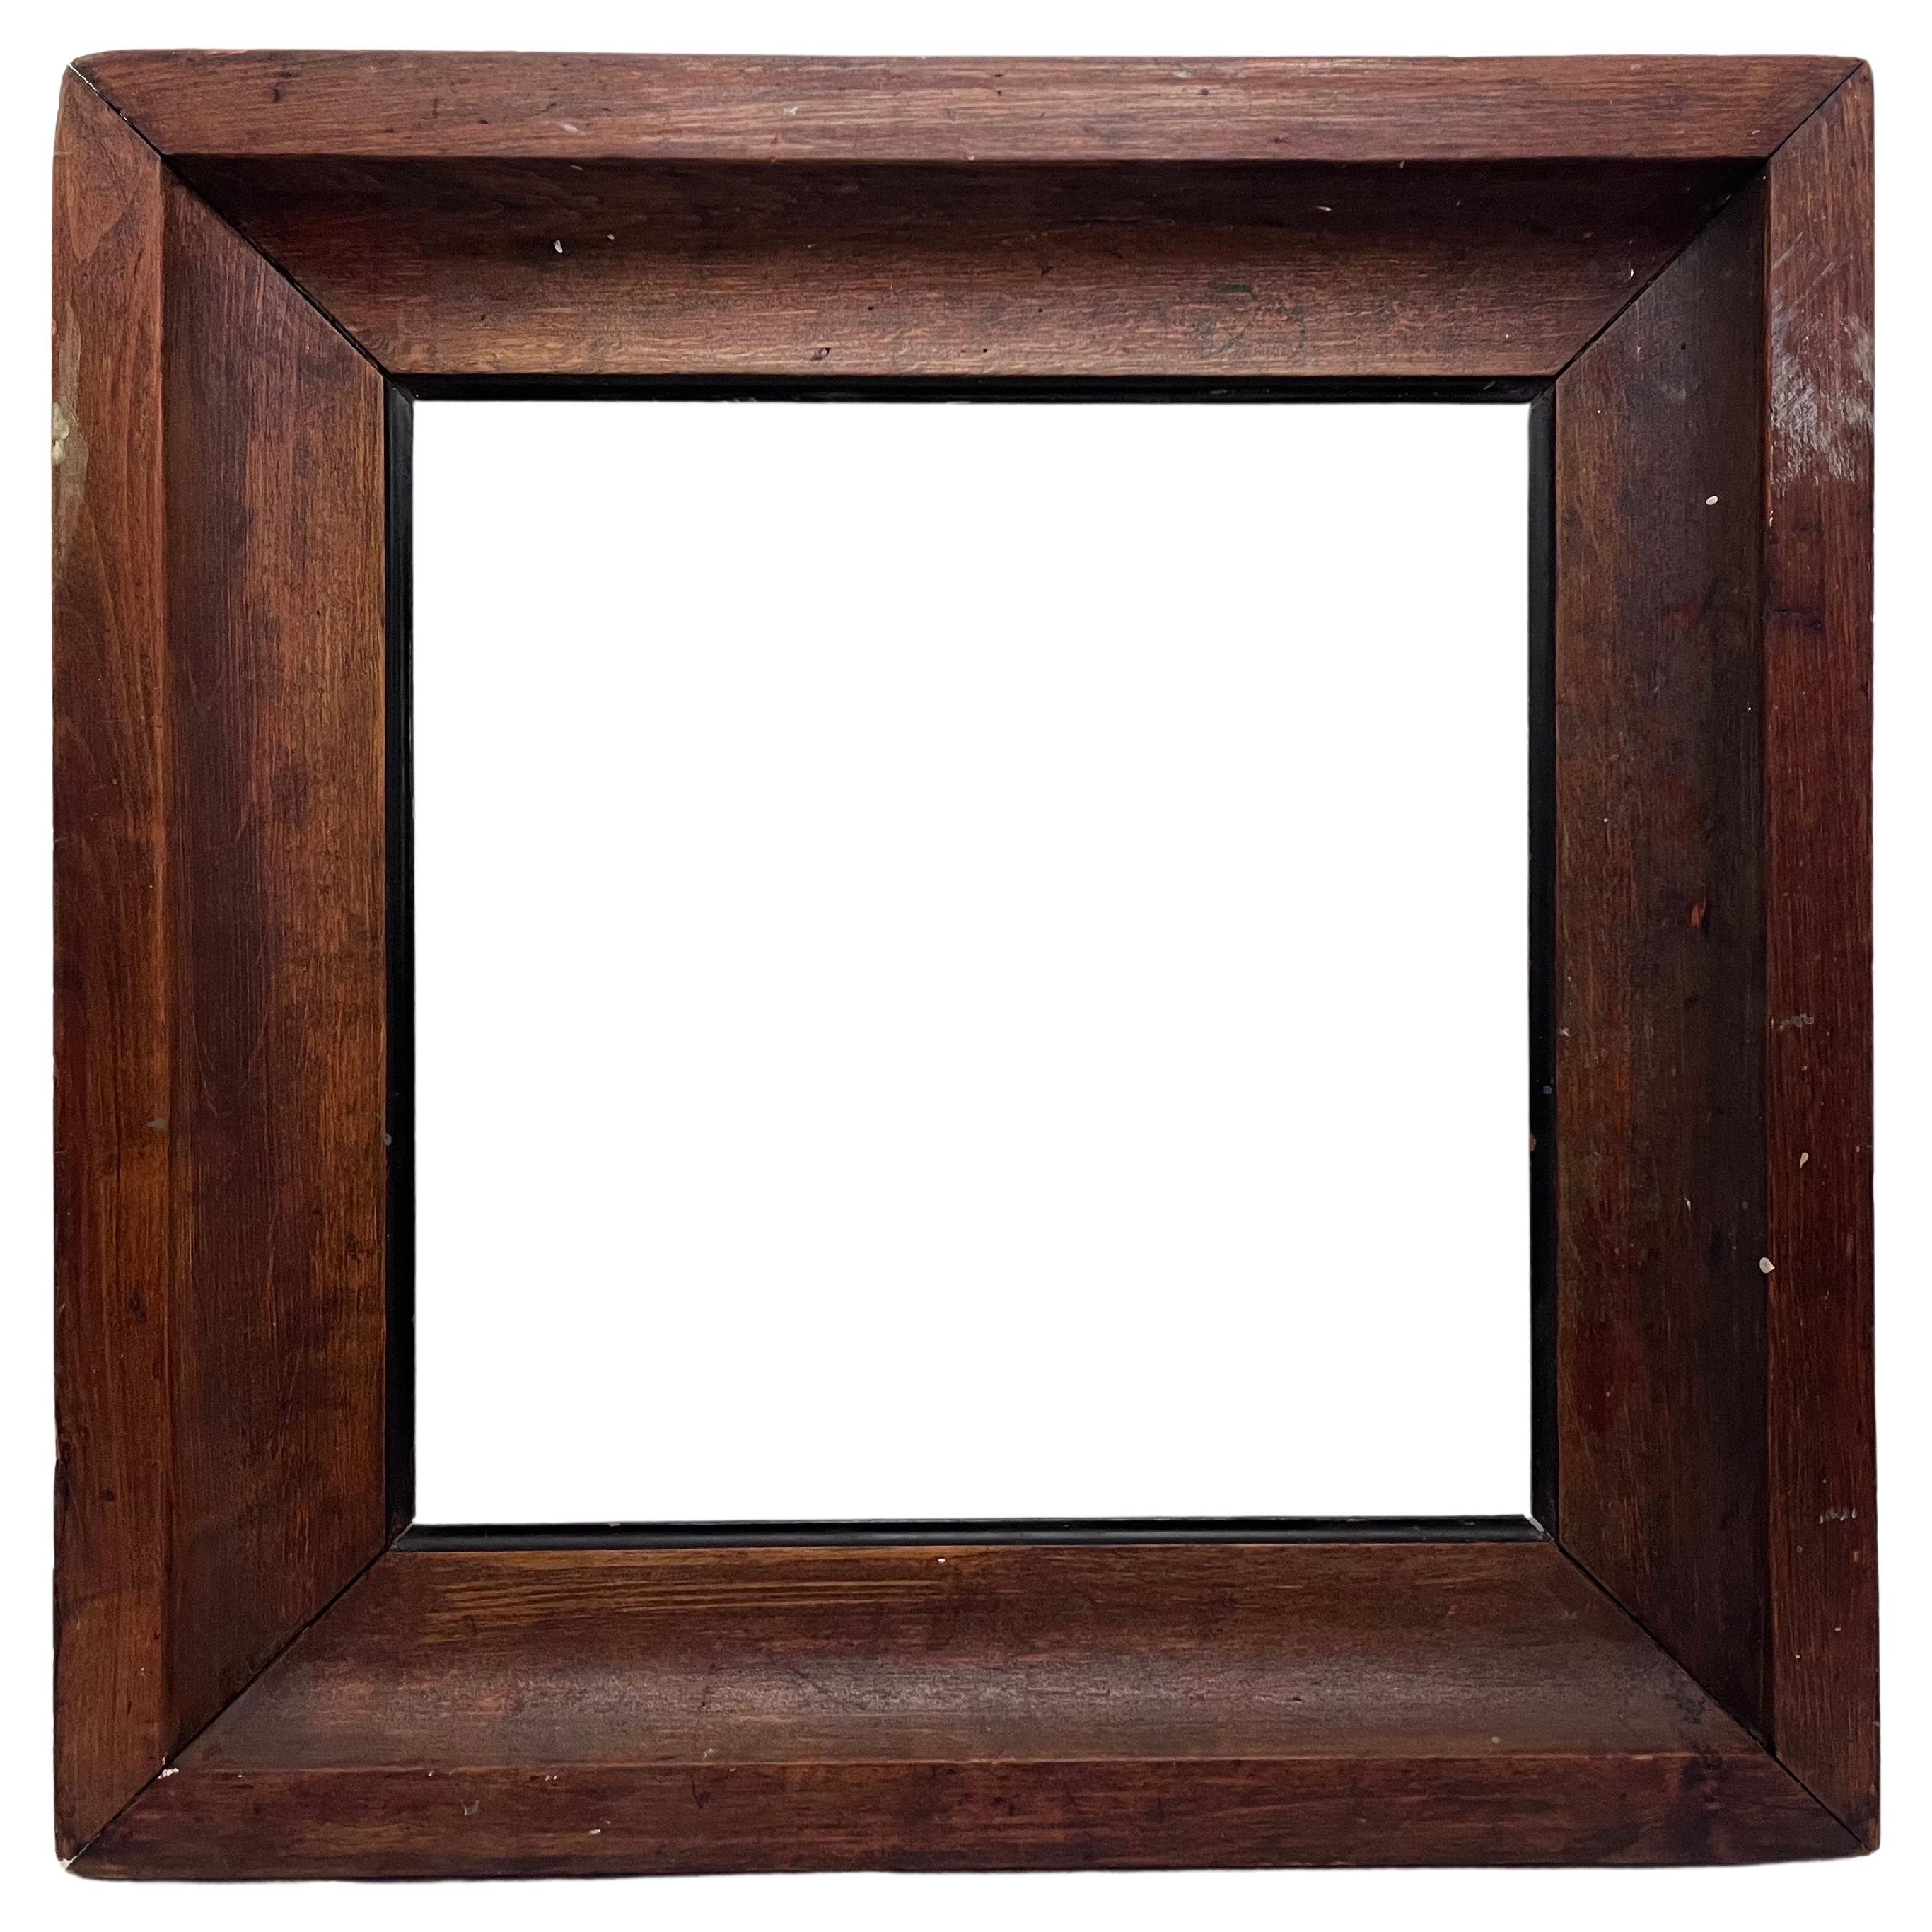 Early 20th Century American Modernist Crafts Style Square Picture Frame 18 x 18